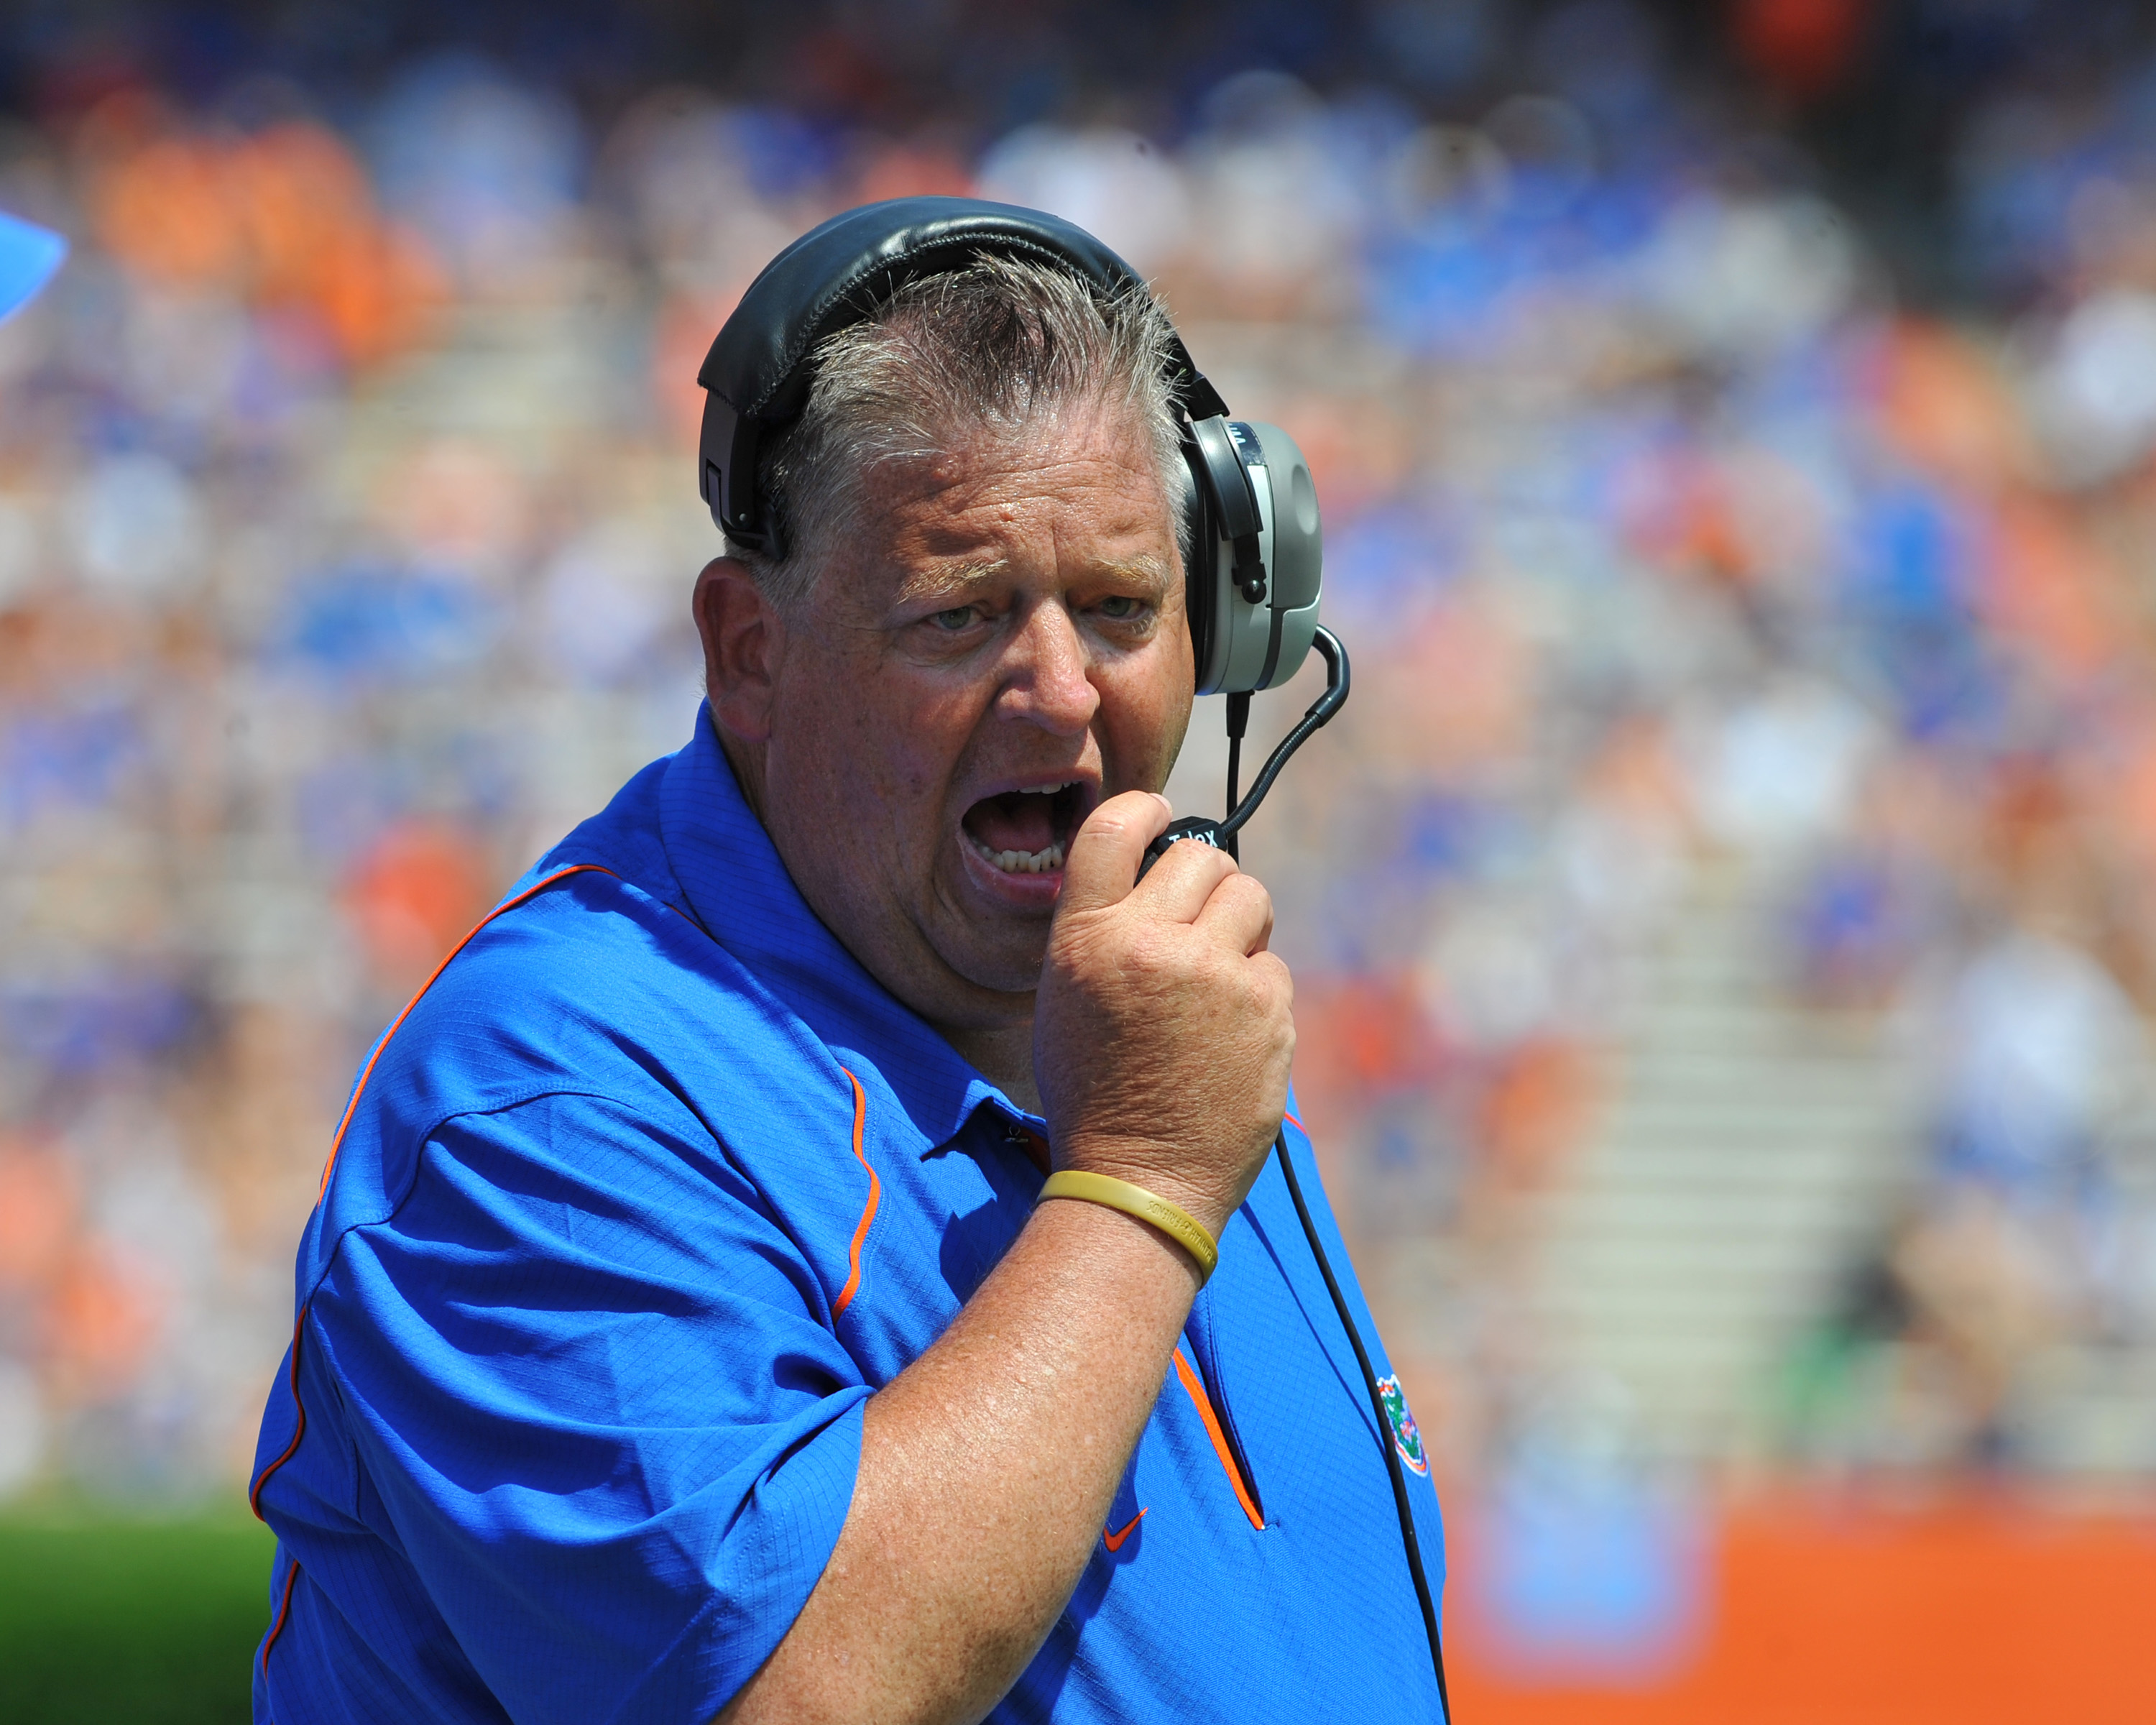 GAINESVILLE, FL - APRIL 9:  Offensive coordinator Charlie Weis of the Florida Gators directs play during the Orange and Blue spring football game April 9, 2011 at Ben Hill Griffin Stadium in Gainesville, Florida.  (Photo by Al Messerschmidt/Getty Images)